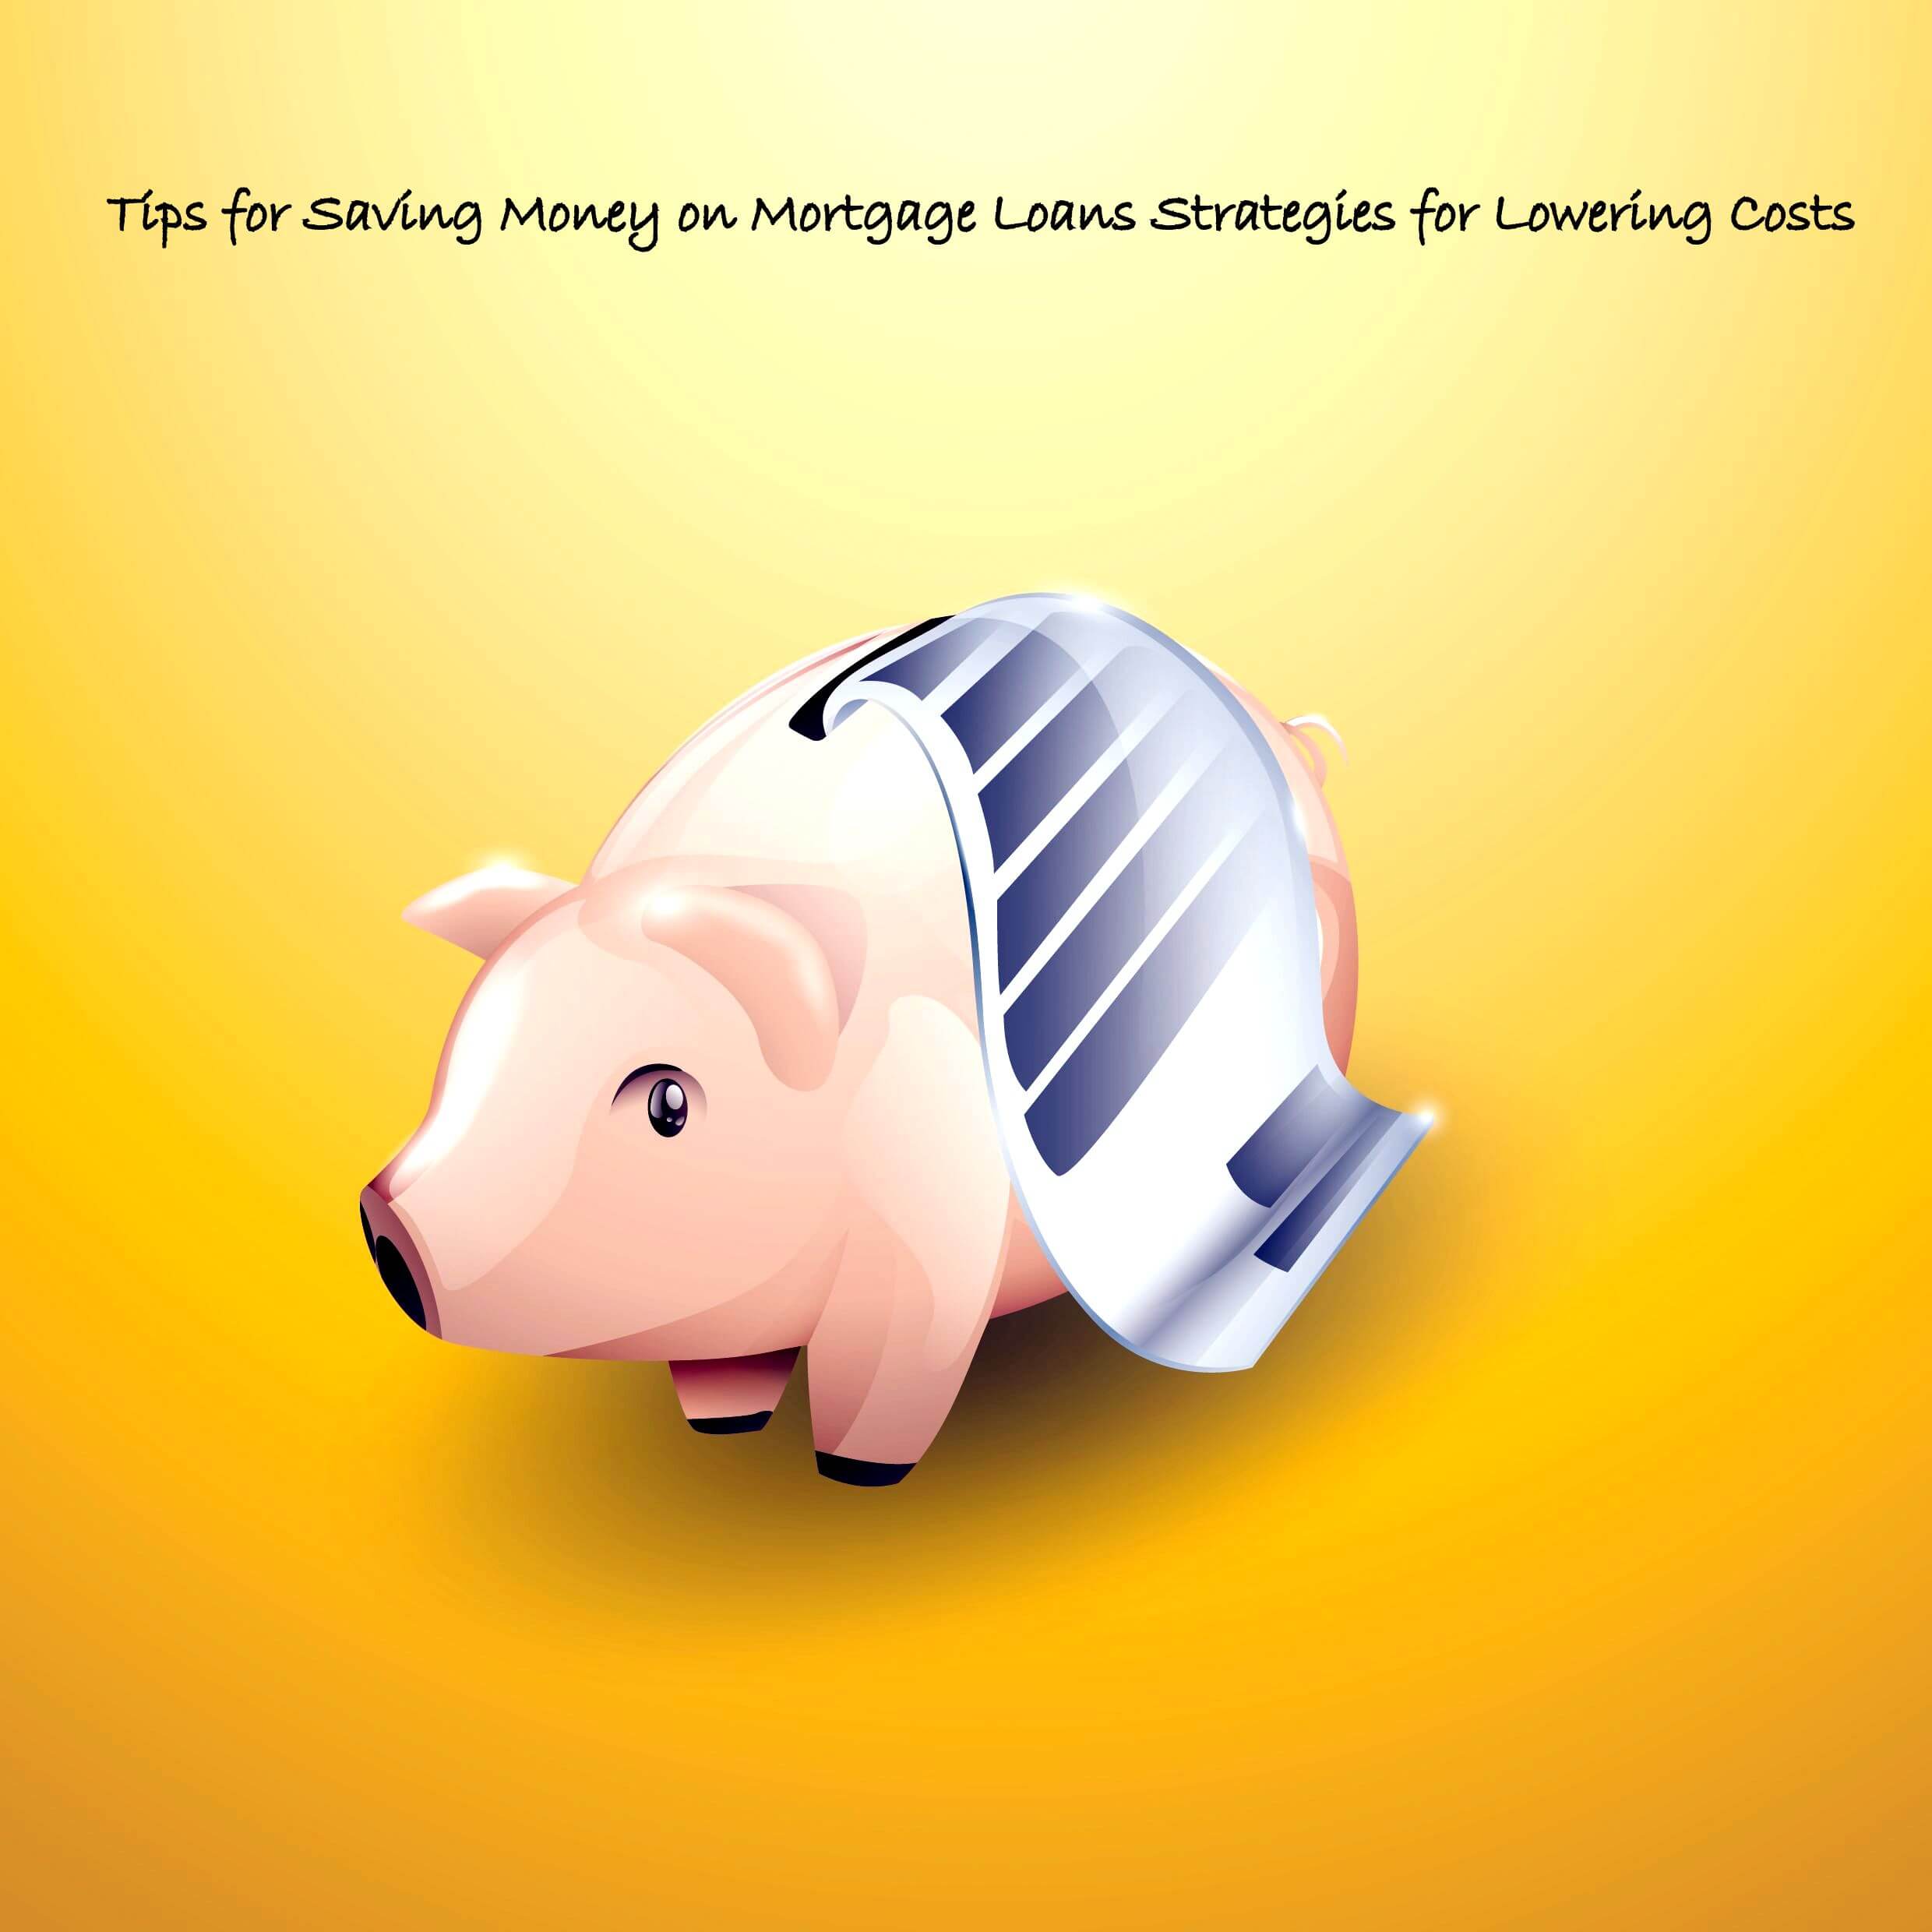 Tips for Saving Money on Mortgage Loans: Strategies for Lowering Costs